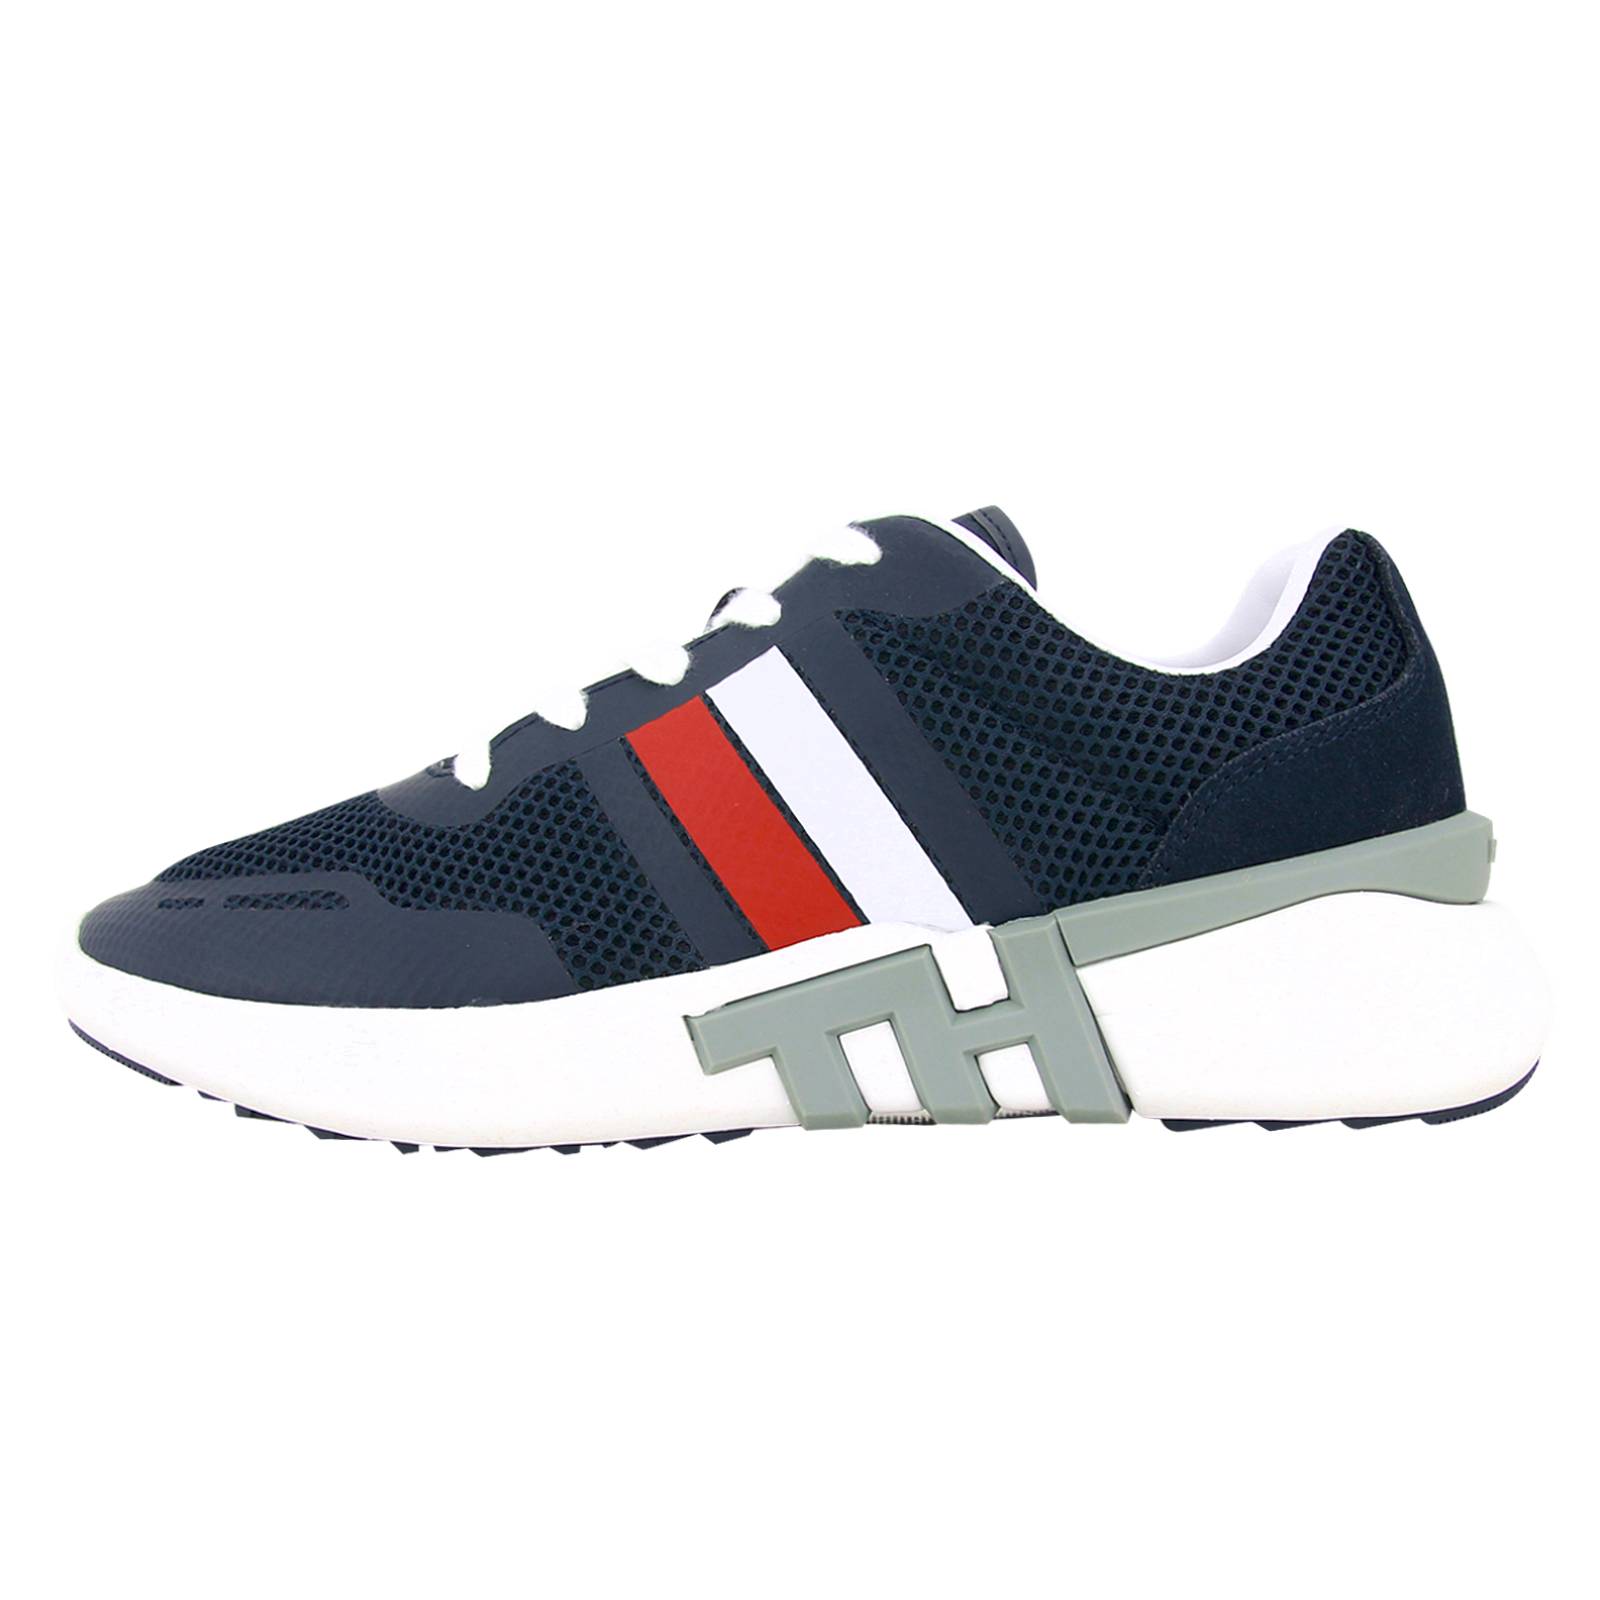 Lightweight Corporate Runner - Tommy Hilfiger Men's casual shoes made ...